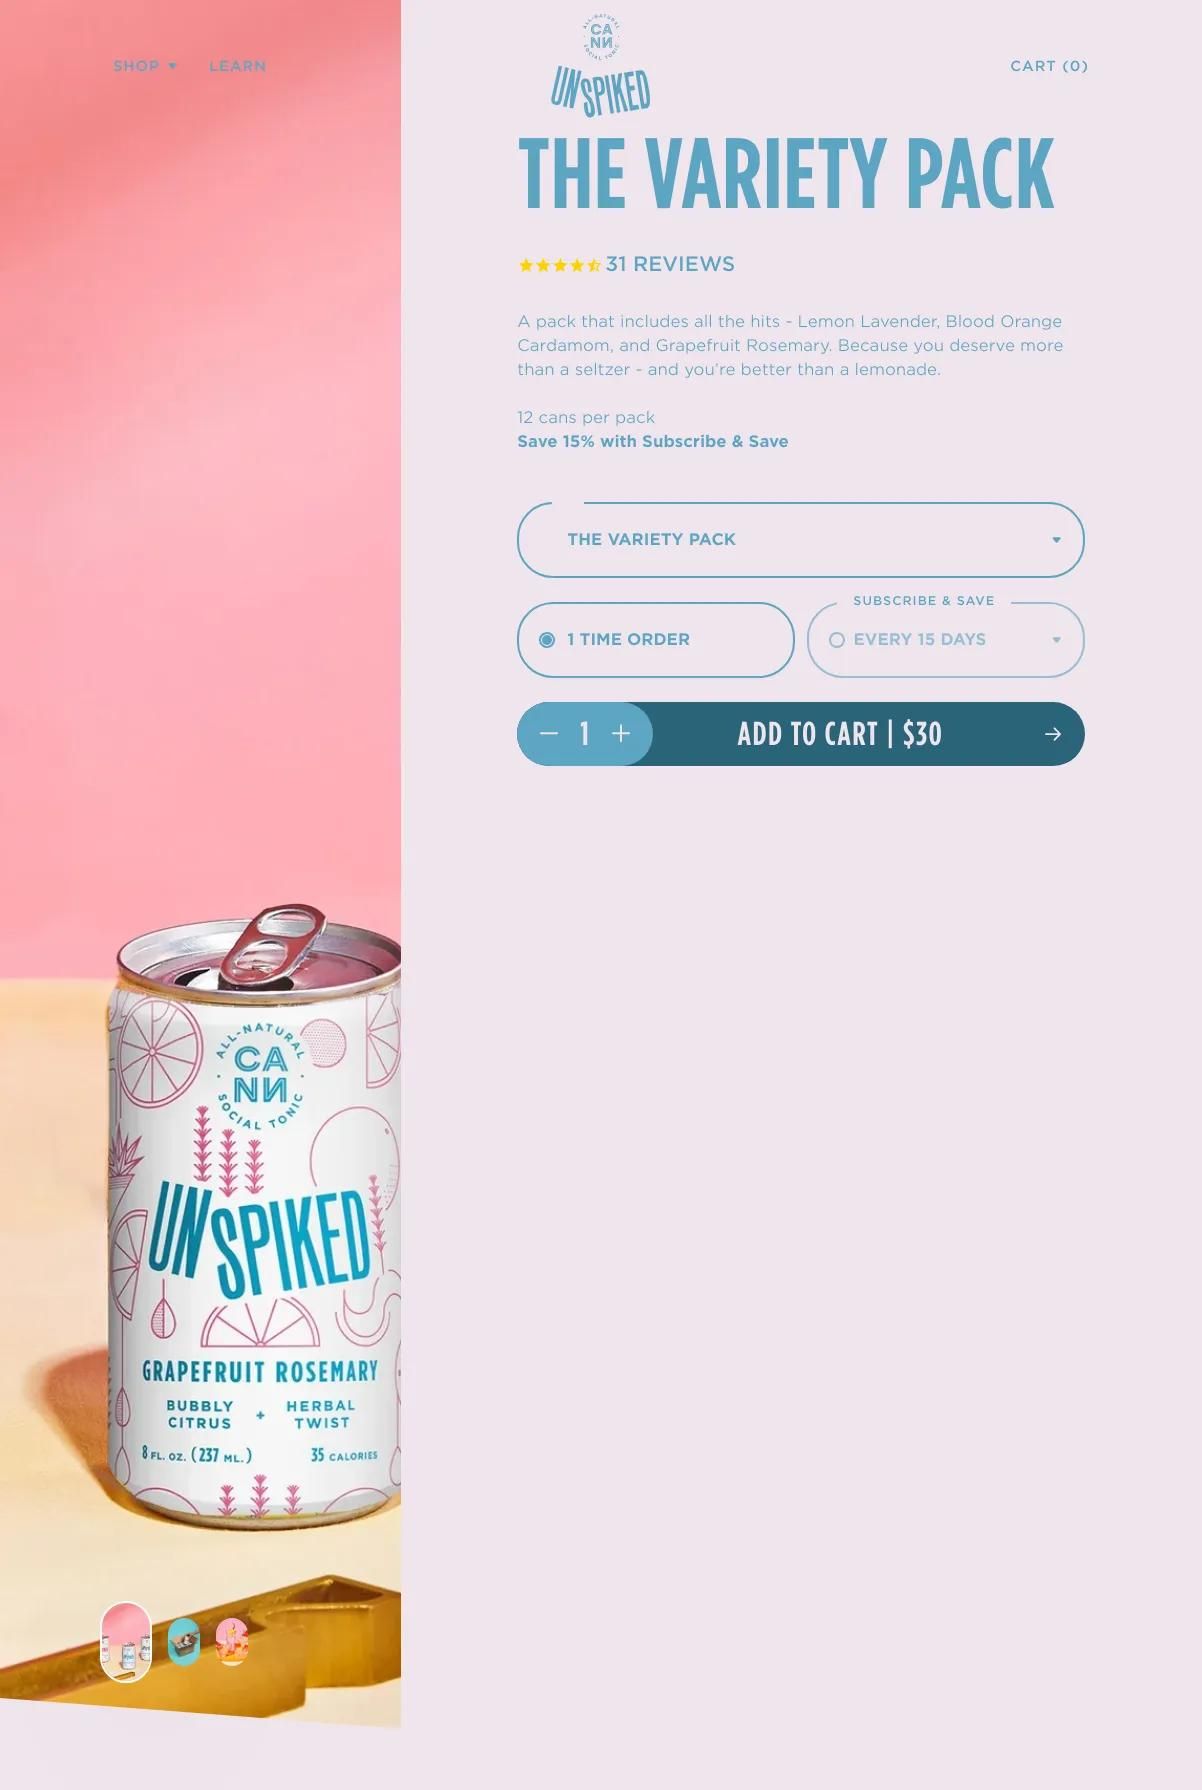 Screenshot 2 of Unspiked (Example Shopify Food and Beverage Website)